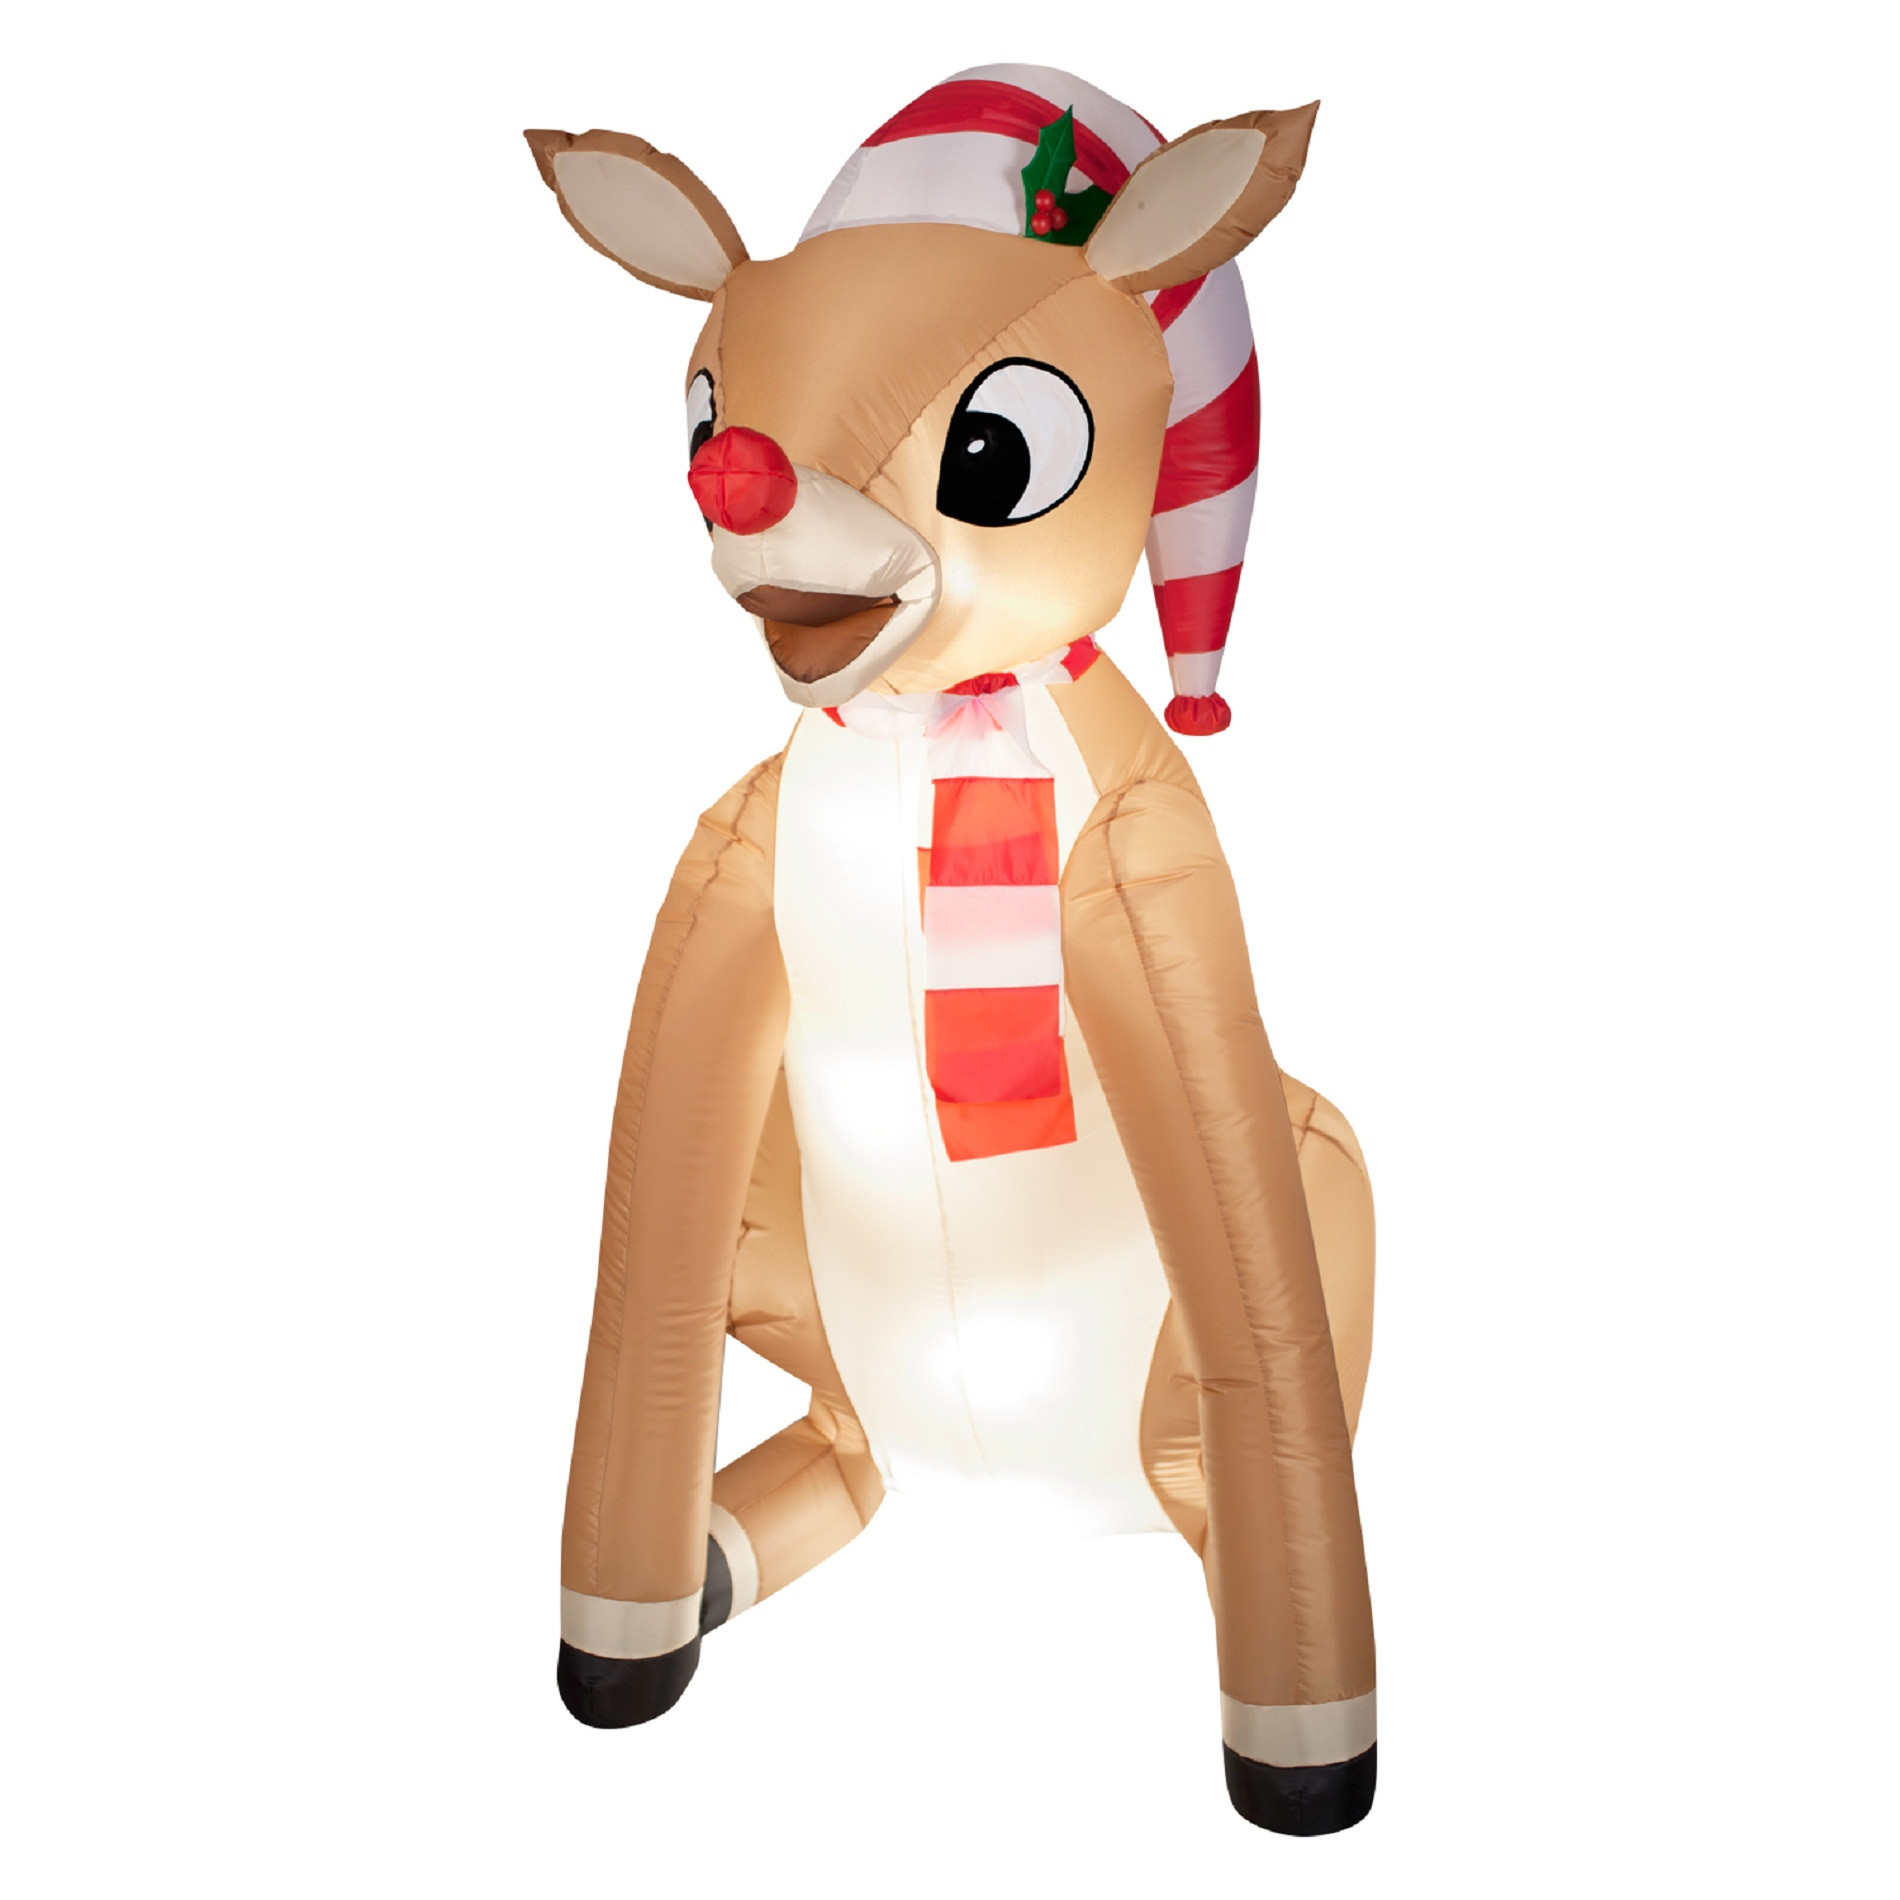 Rudolph Outdoor Christmas Decorations
 Rudolph Christmas Outdoor Decorations with Scarf Airblown